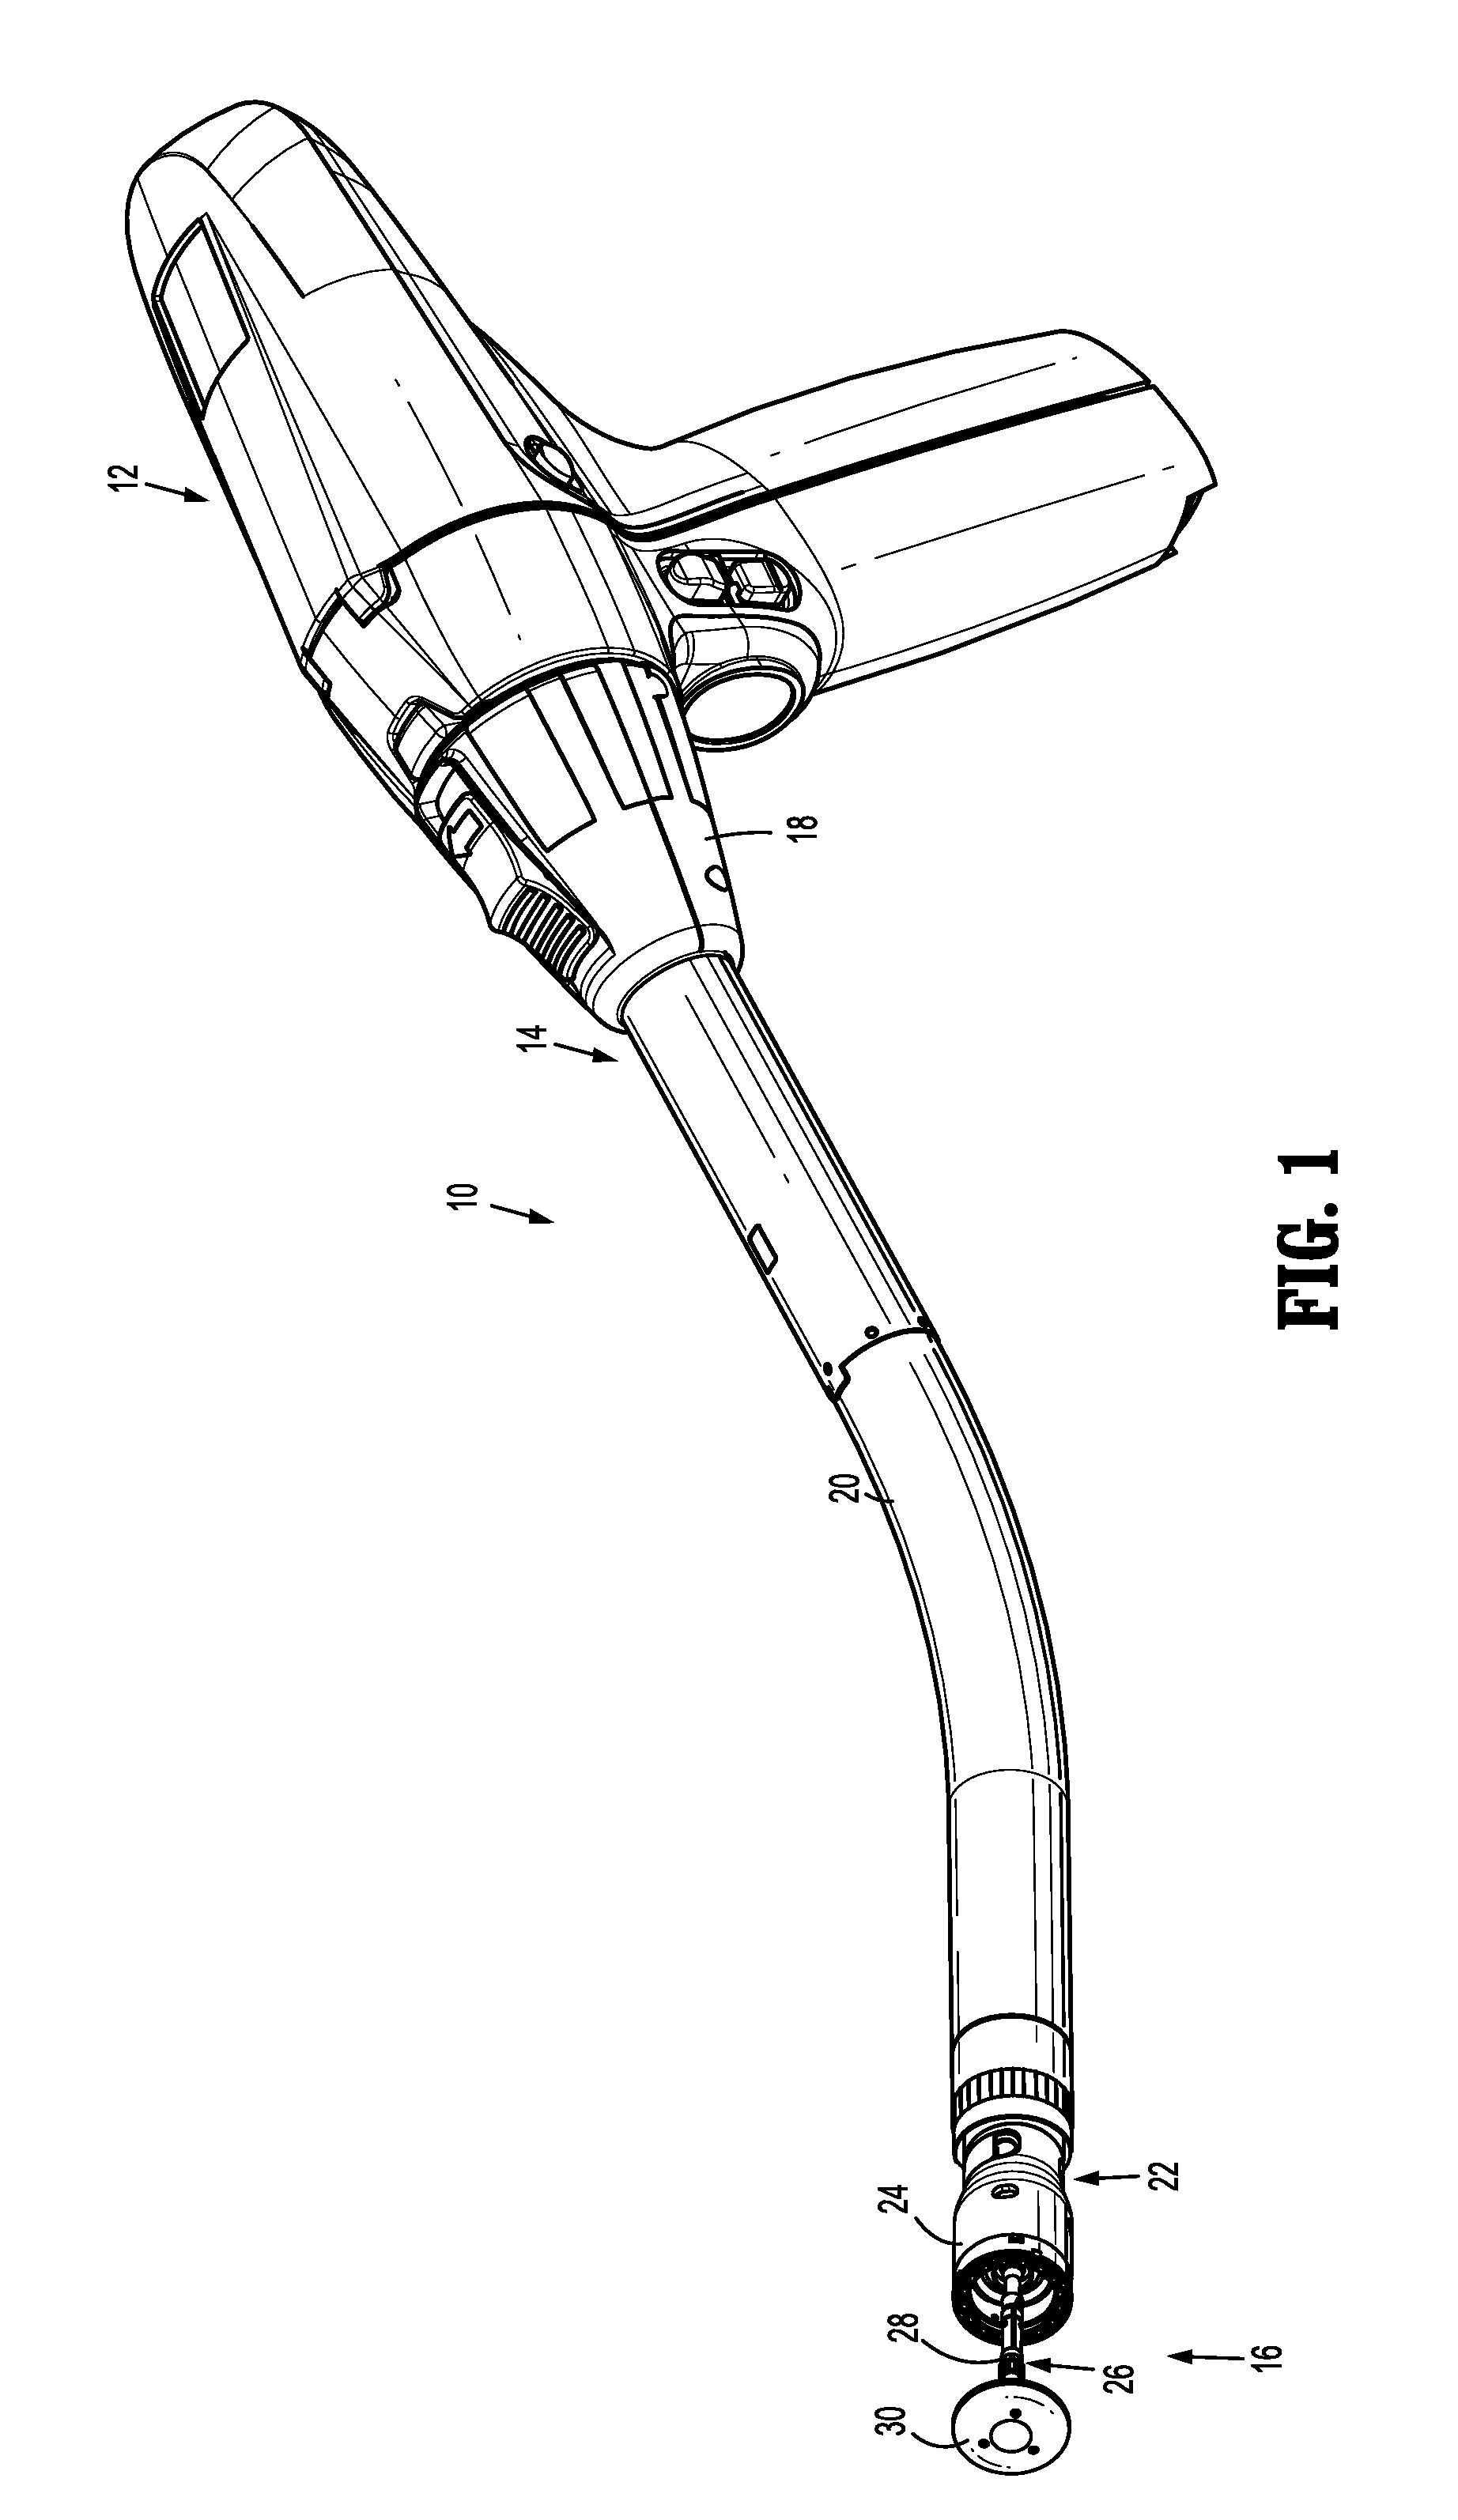 Cleaning apparatus for surgical instruments